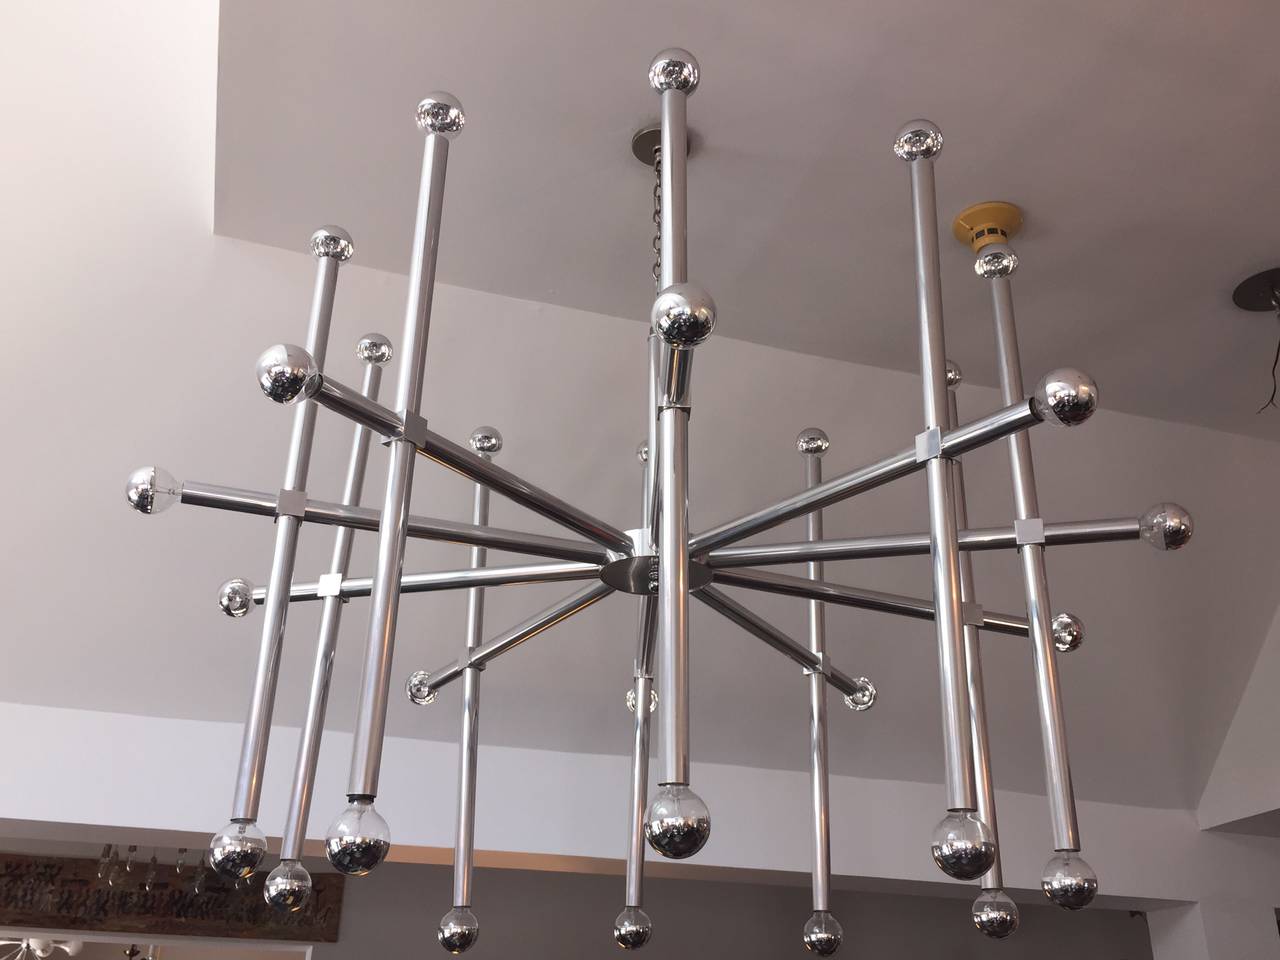 This is an extremely rare chandelier by John Vesey - very impactful to see in person. Large scale fixture for large scale projects or commercial use. 
 Beautiful arms with 25-40 watt mercury tipped light bulbs (best to be used on a dimmer). This